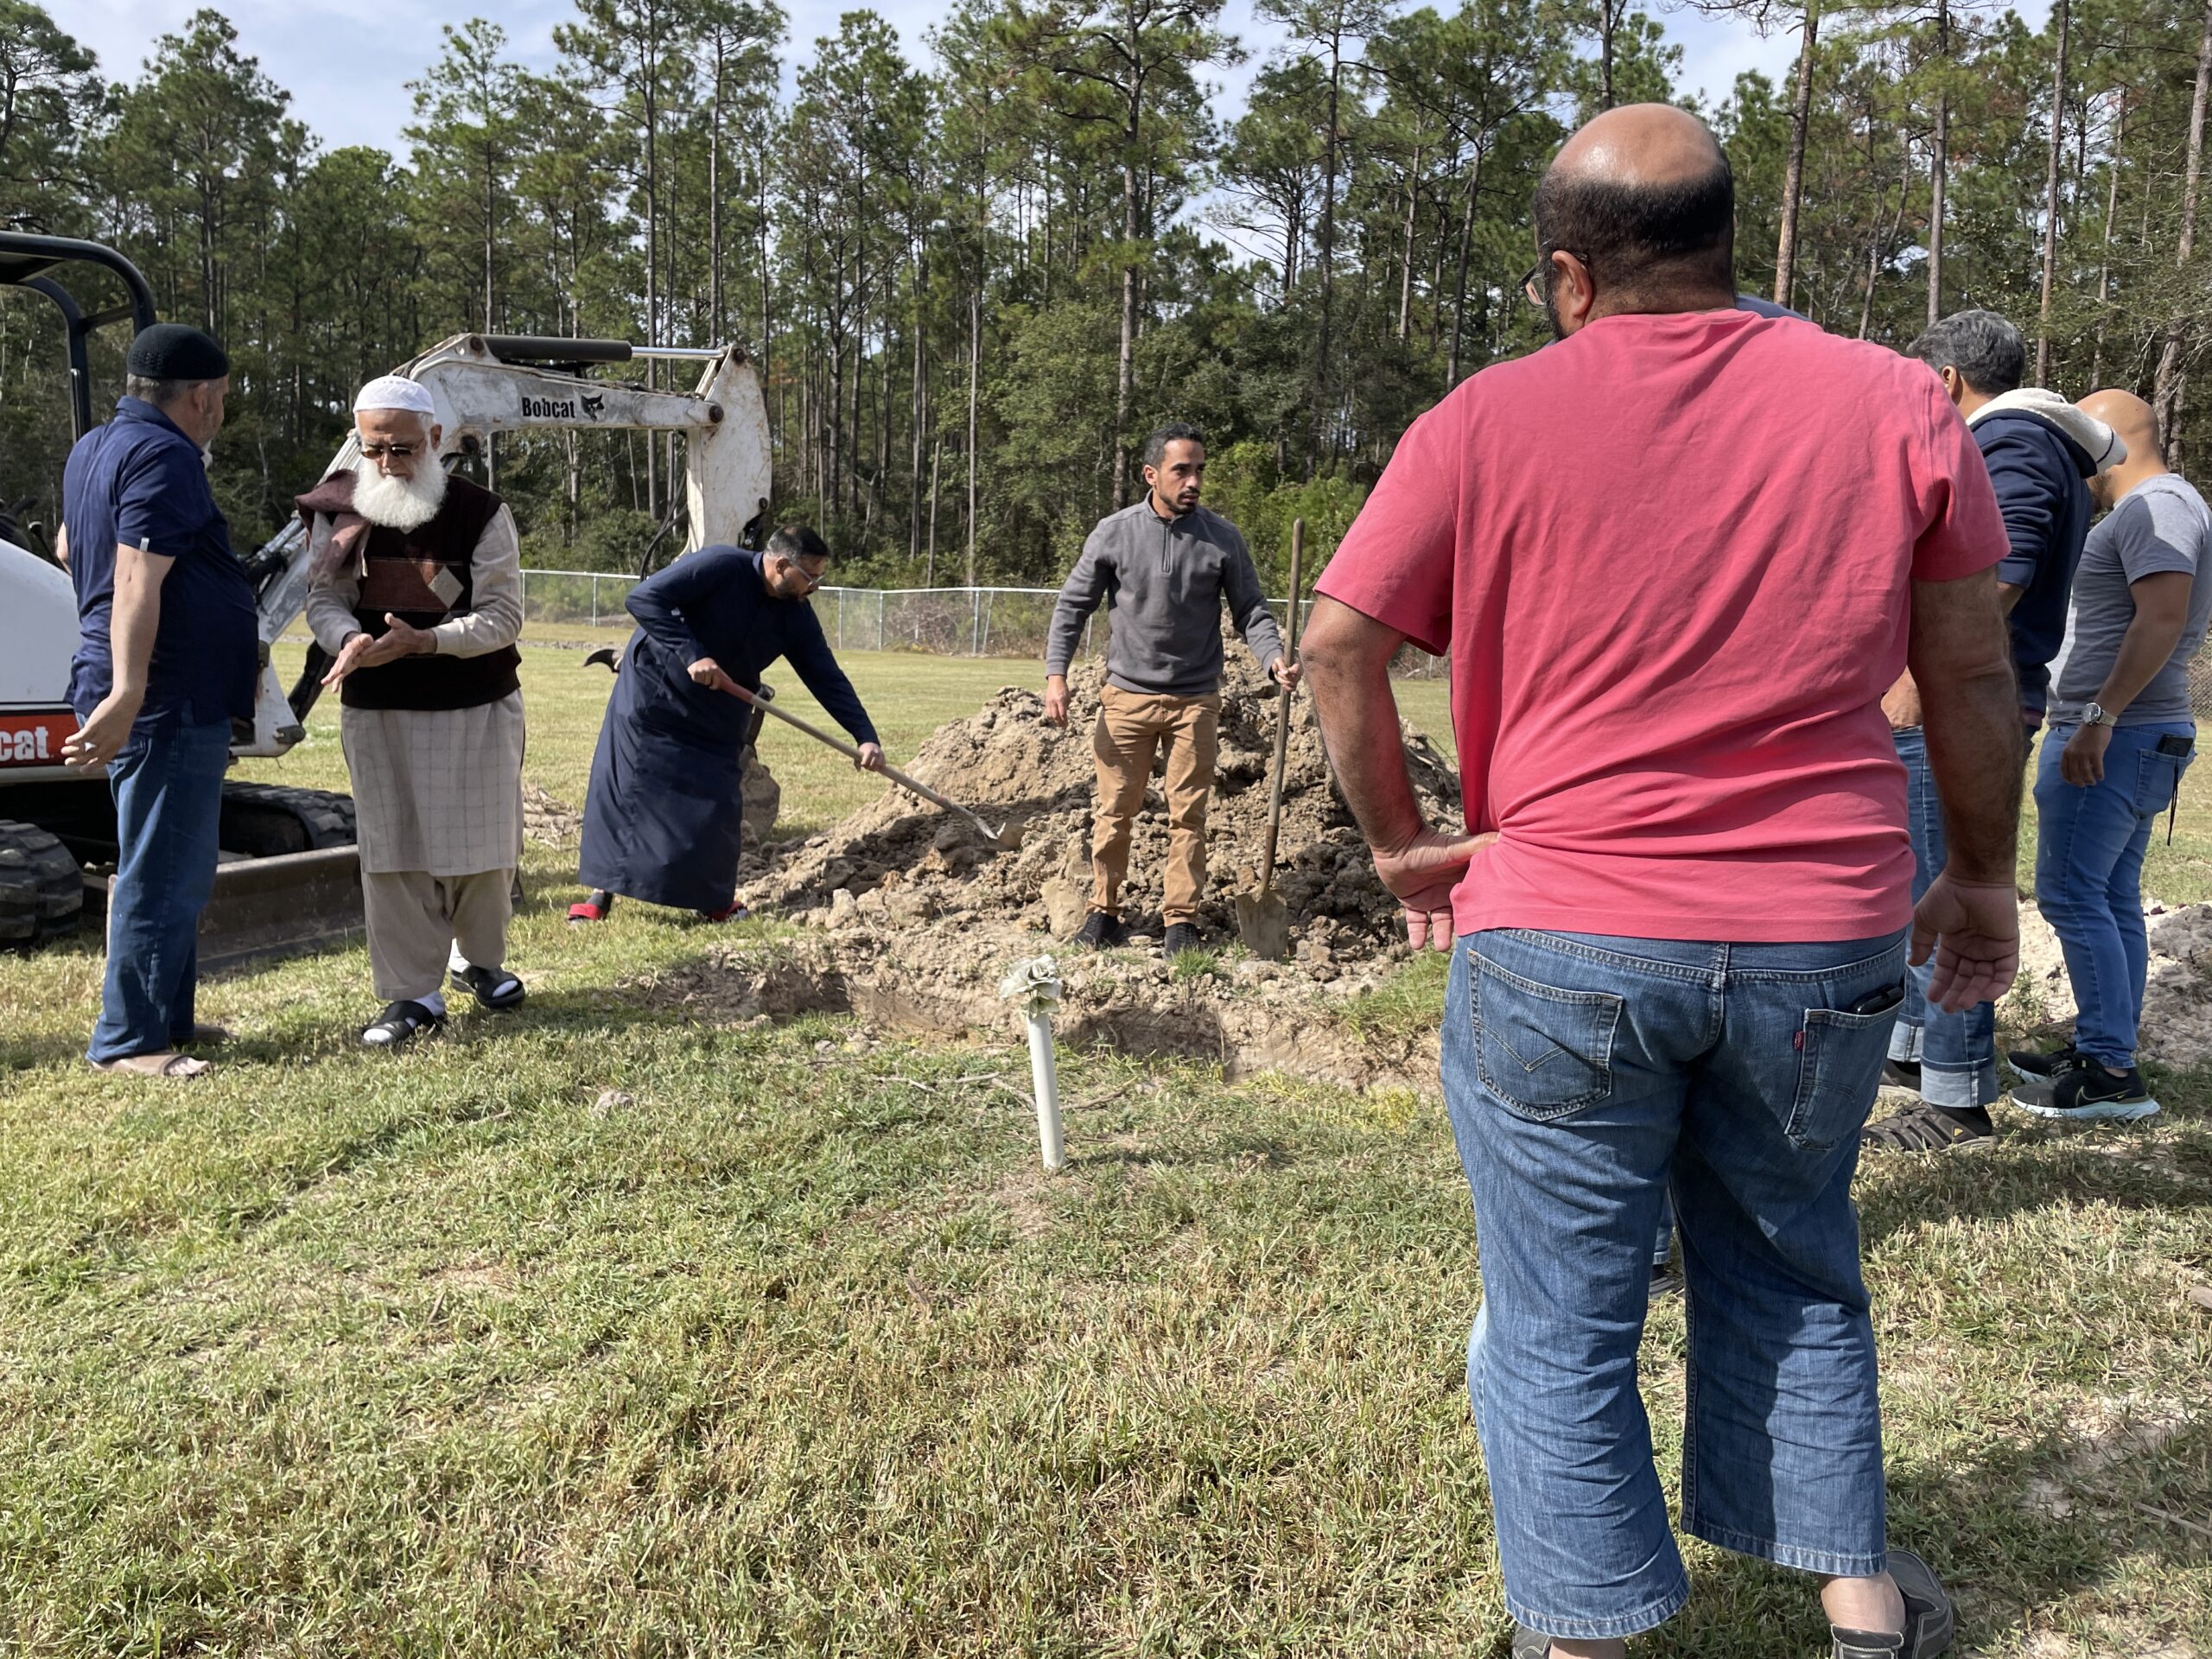 Photograph at a cemetery, people are facilitating a traditional Muslim burial